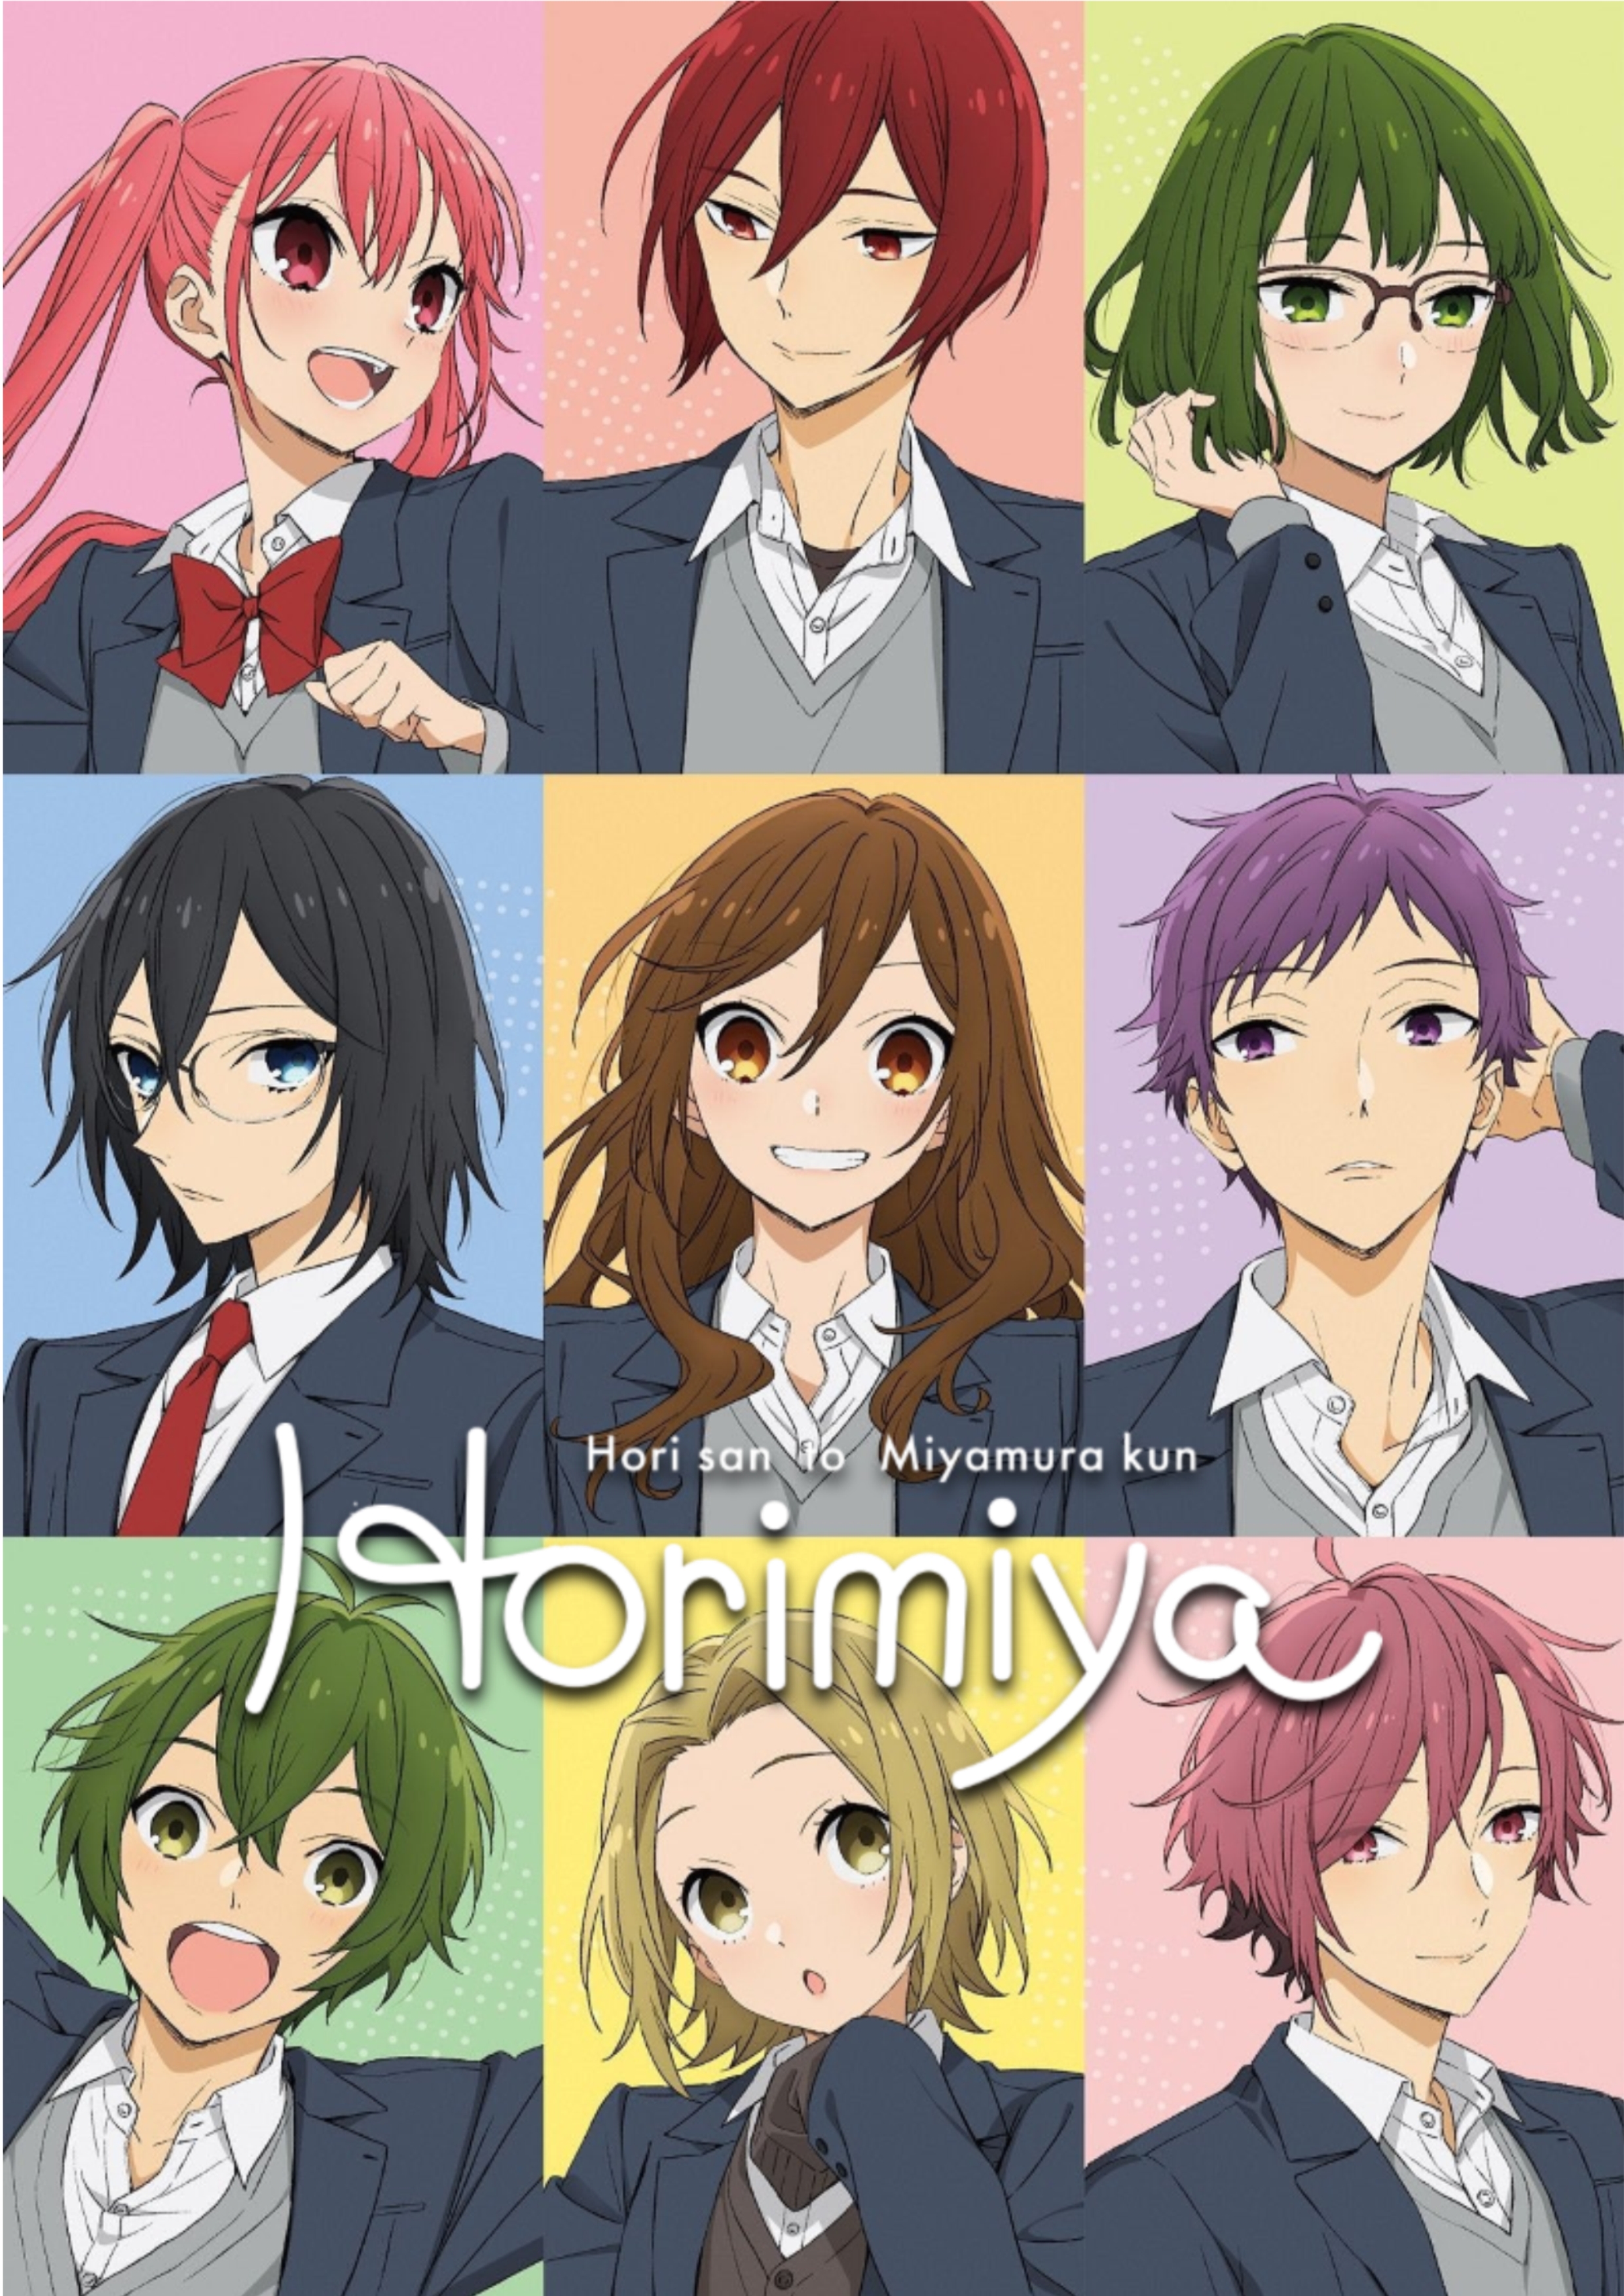 6 RomCom Anime Coming in April 2022 Will Make Spring Filled With Romance -  Anime Corner